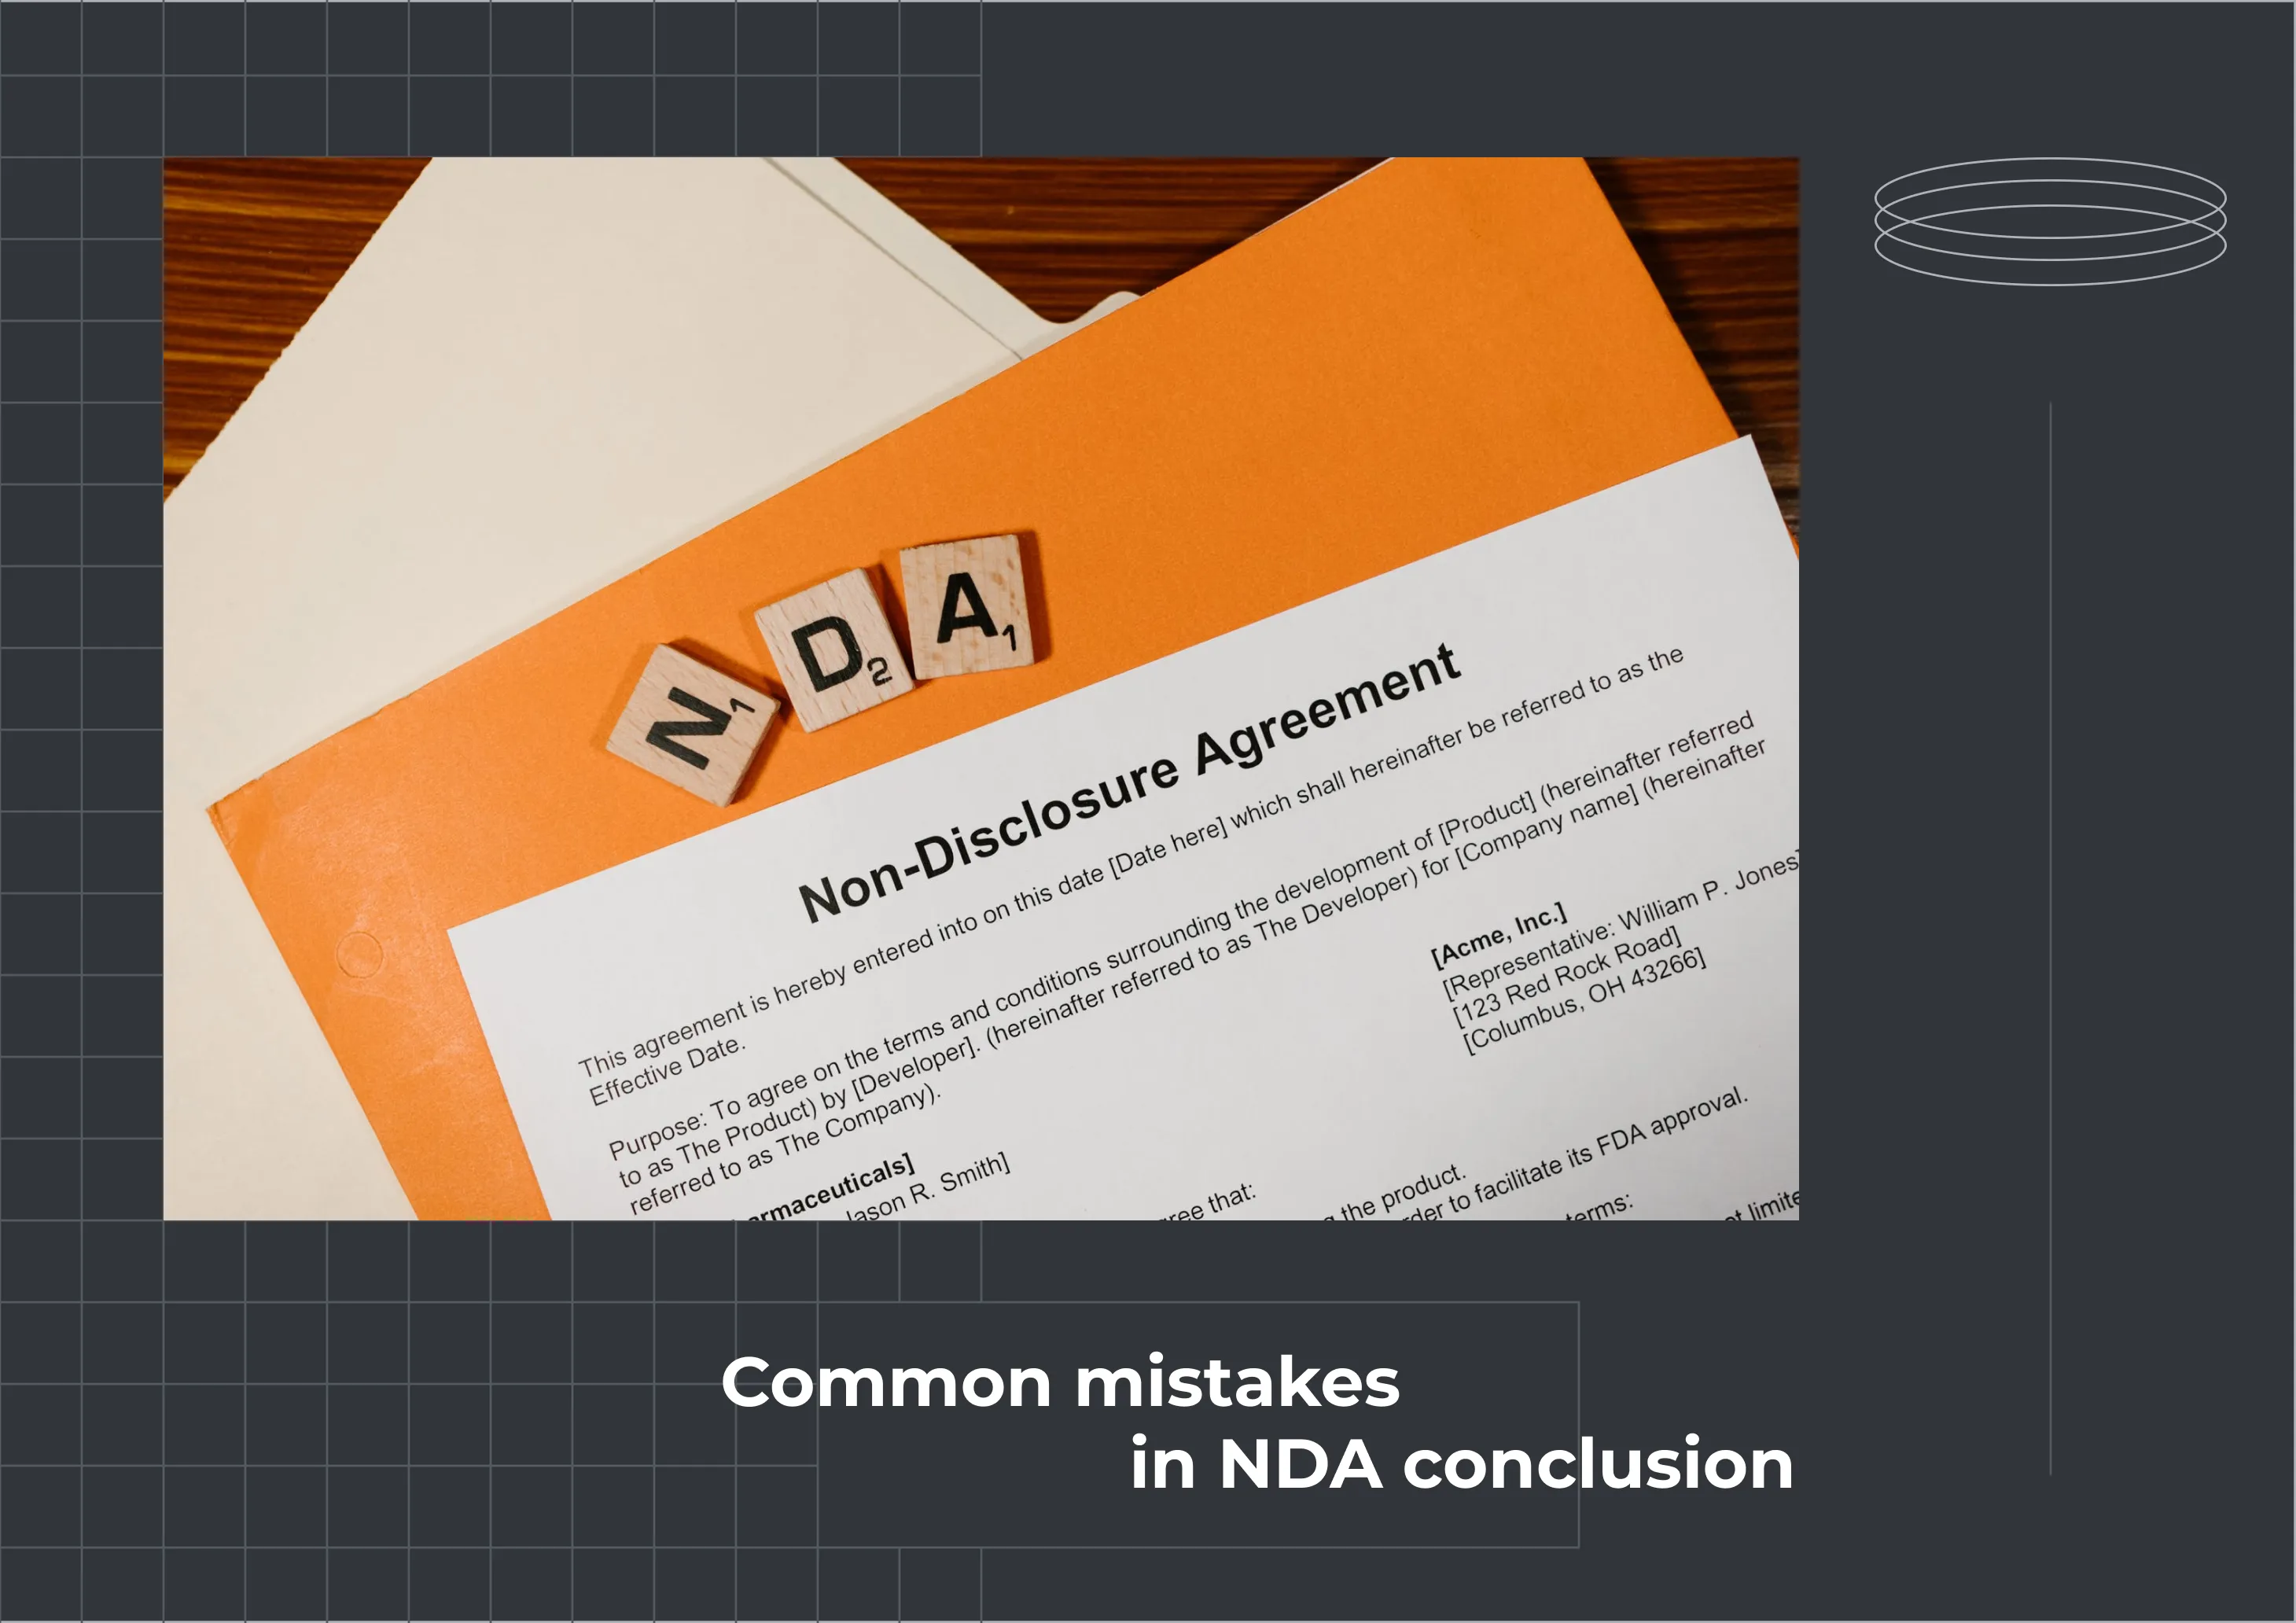 What are the common mistakes in NDA conclusion?